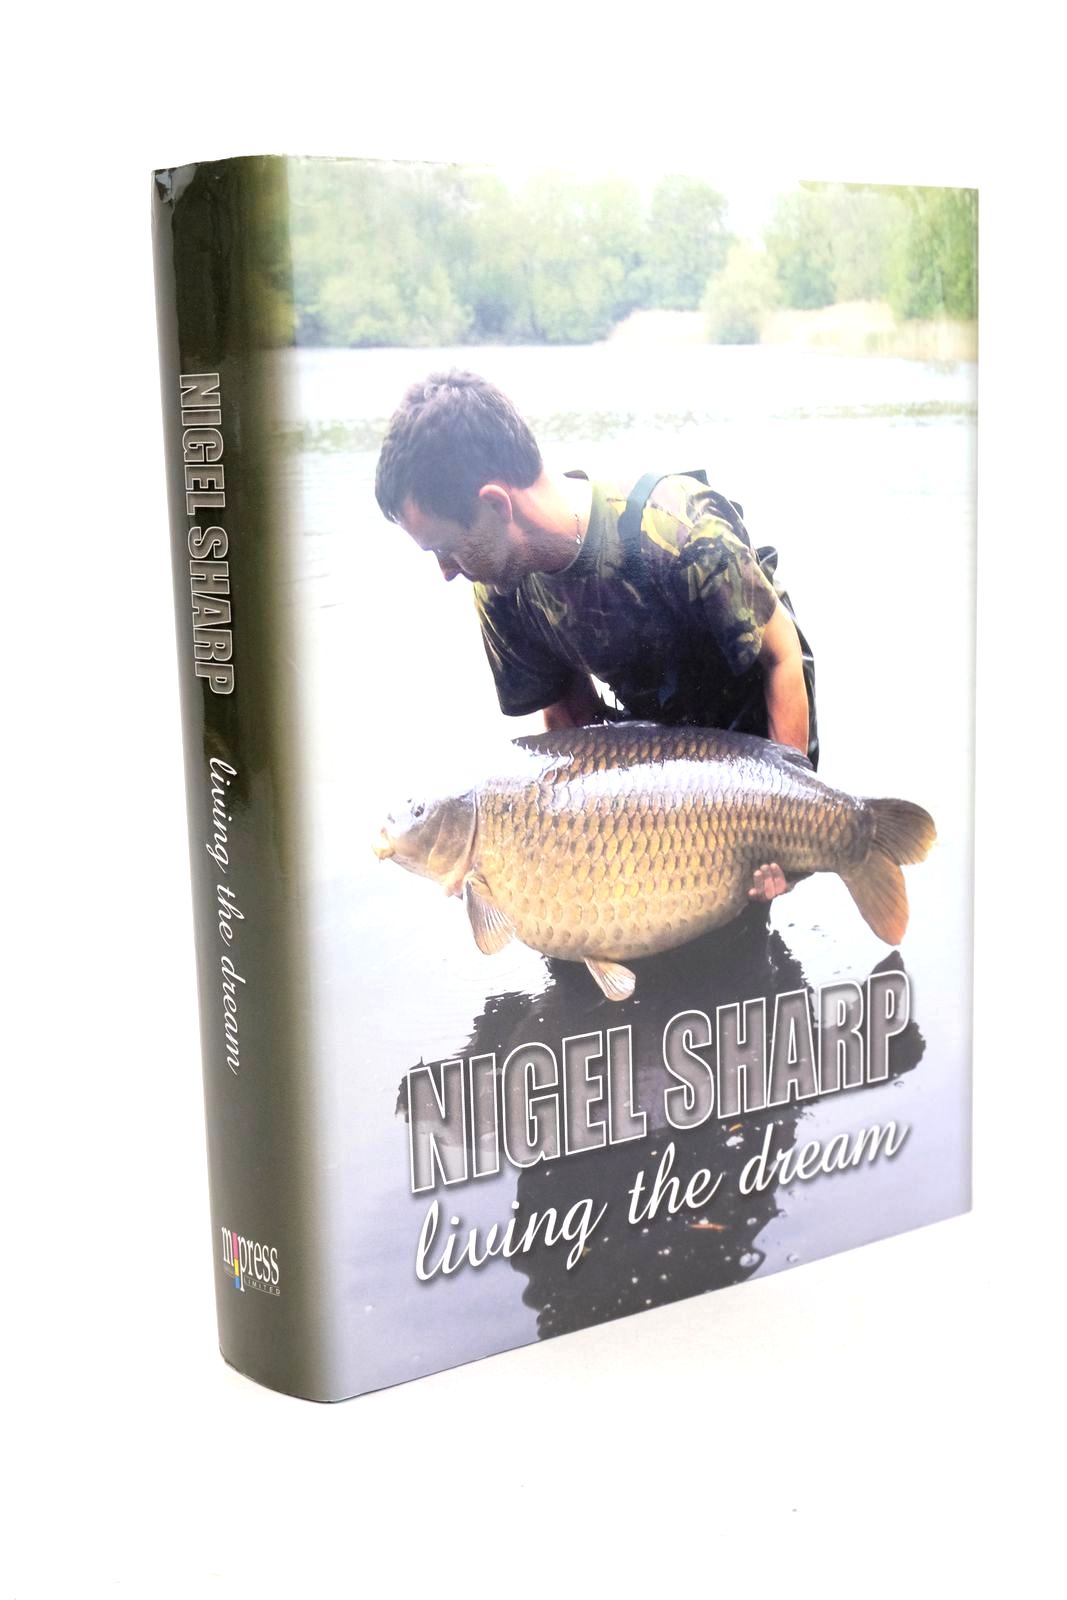 Photo of LIVING THE DREAM written by Sharp, Nigel published by M Press (media) Ltd. (STOCK CODE: 1327644)  for sale by Stella & Rose's Books